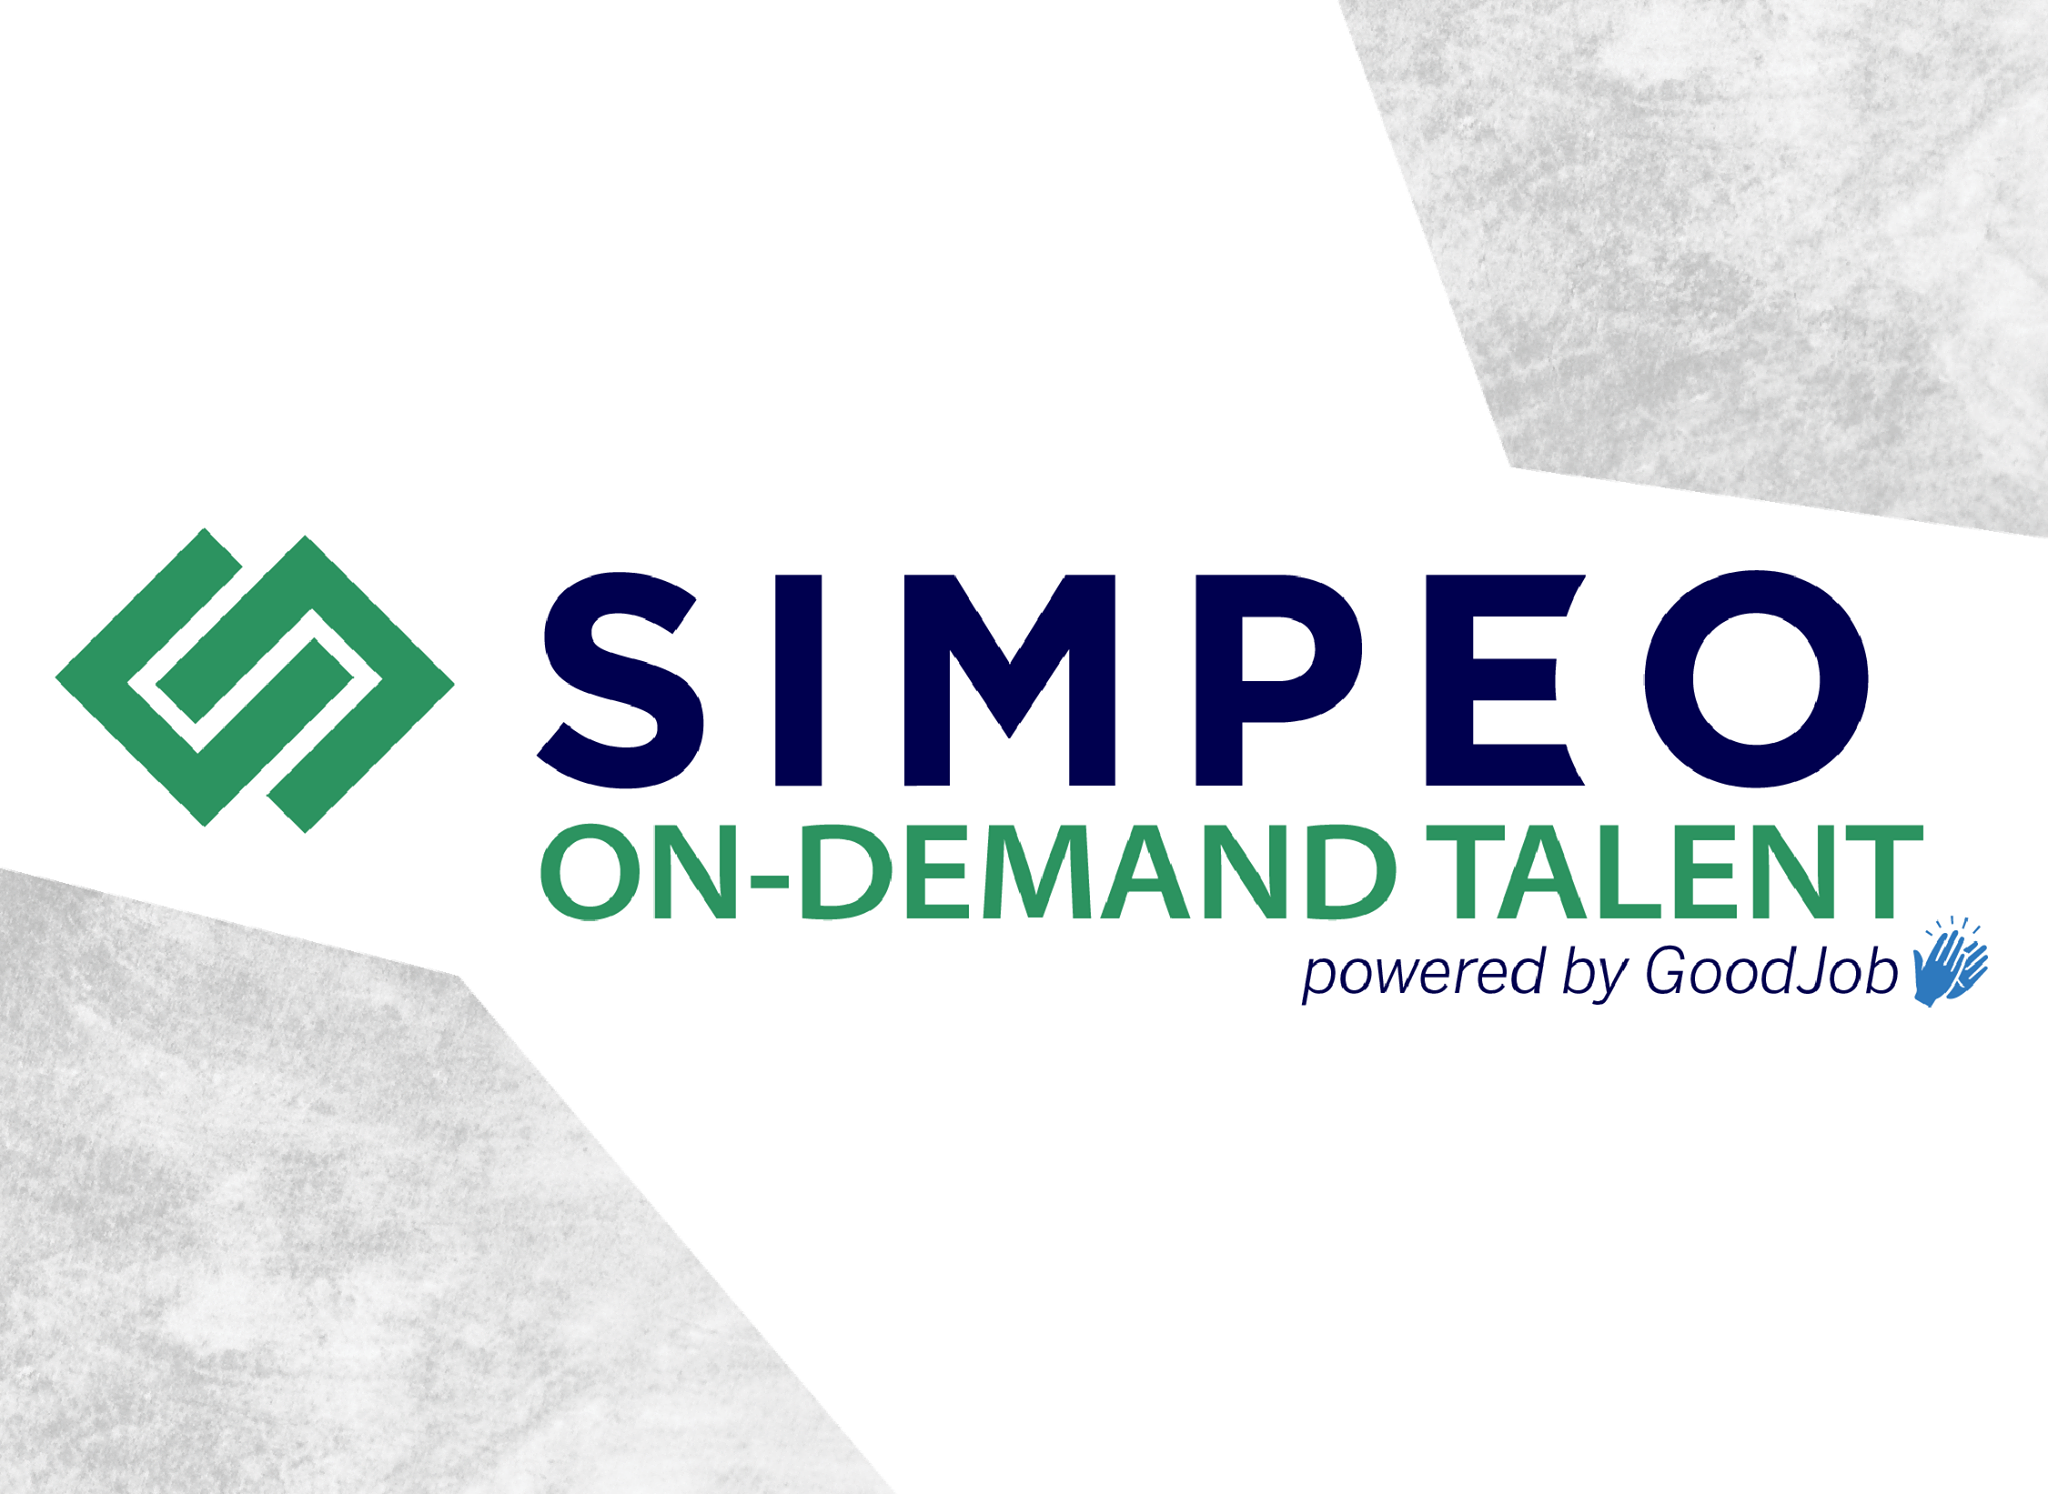 simpeo on demand talent powered by goodjob 